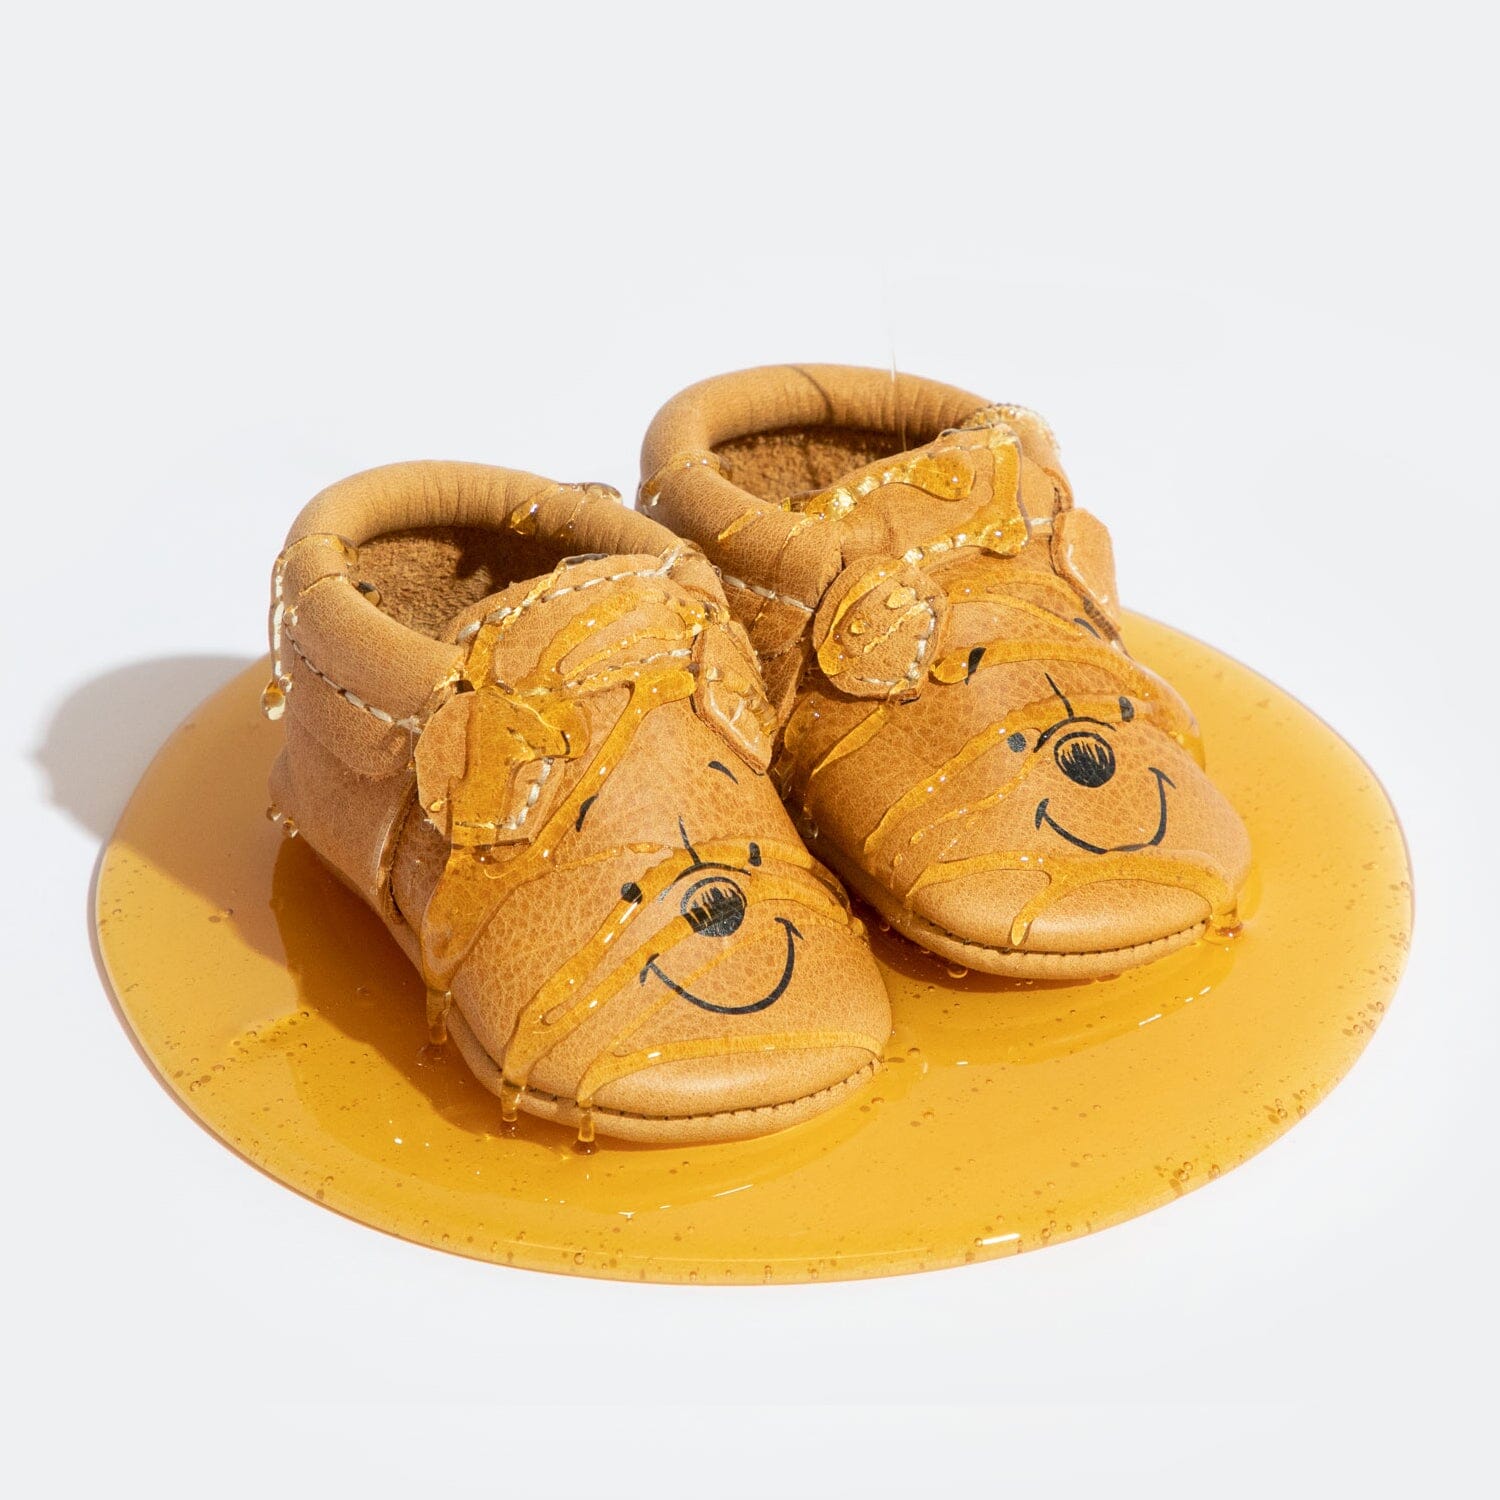 Playmaker City Baby Shoe – Freshly Picked